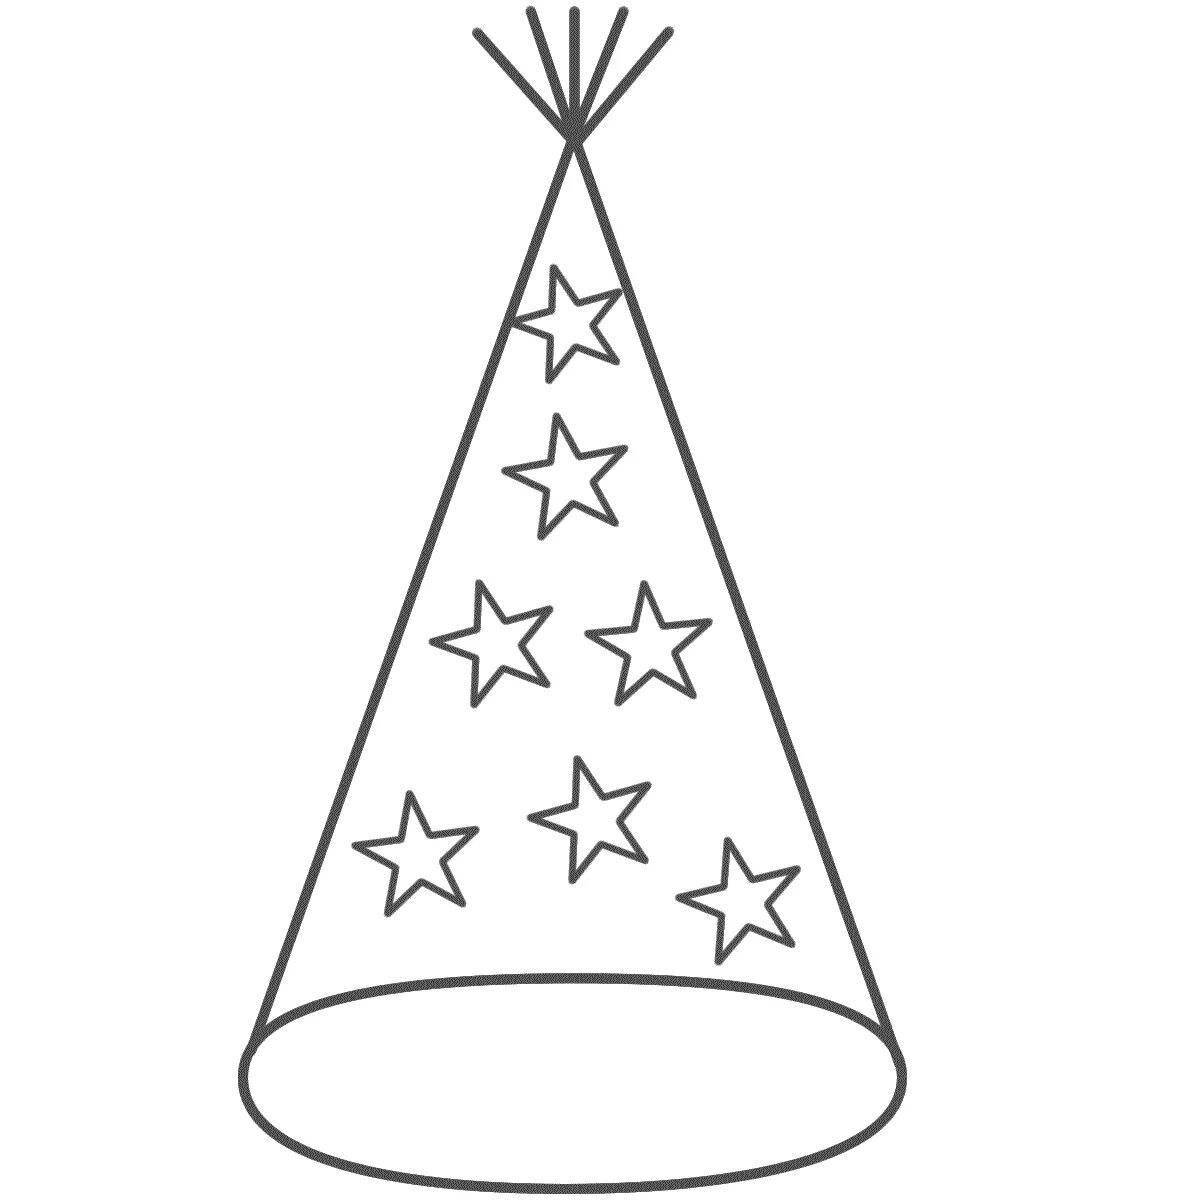 Coloring page playful christmas hat